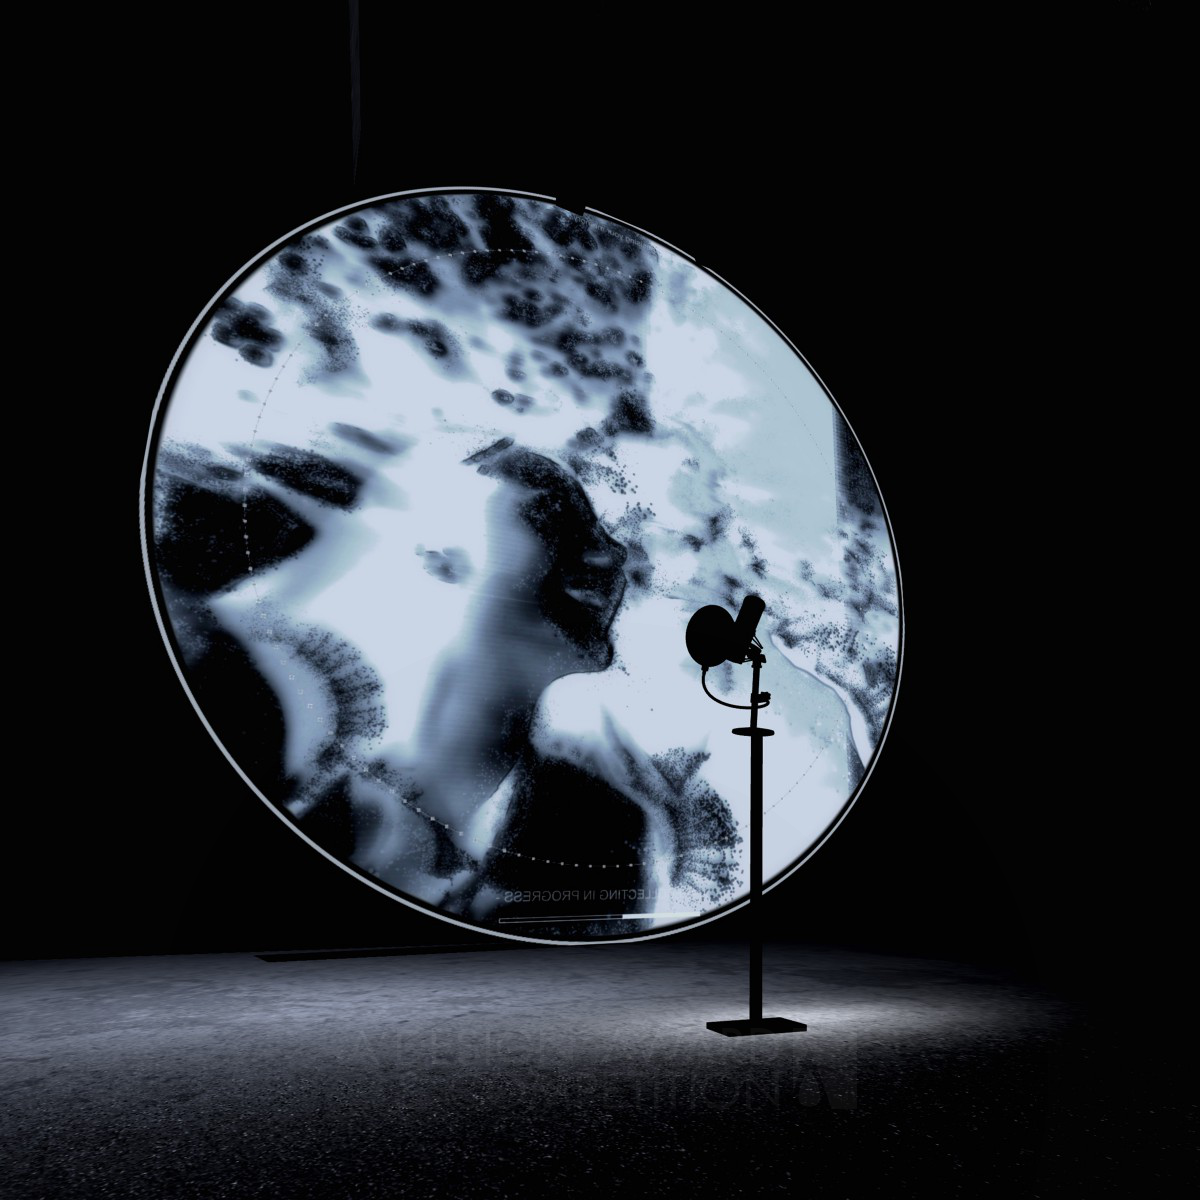 ReCollection Interactive AI Art Experience Design by Weidi Zhang and Jieliang Luo